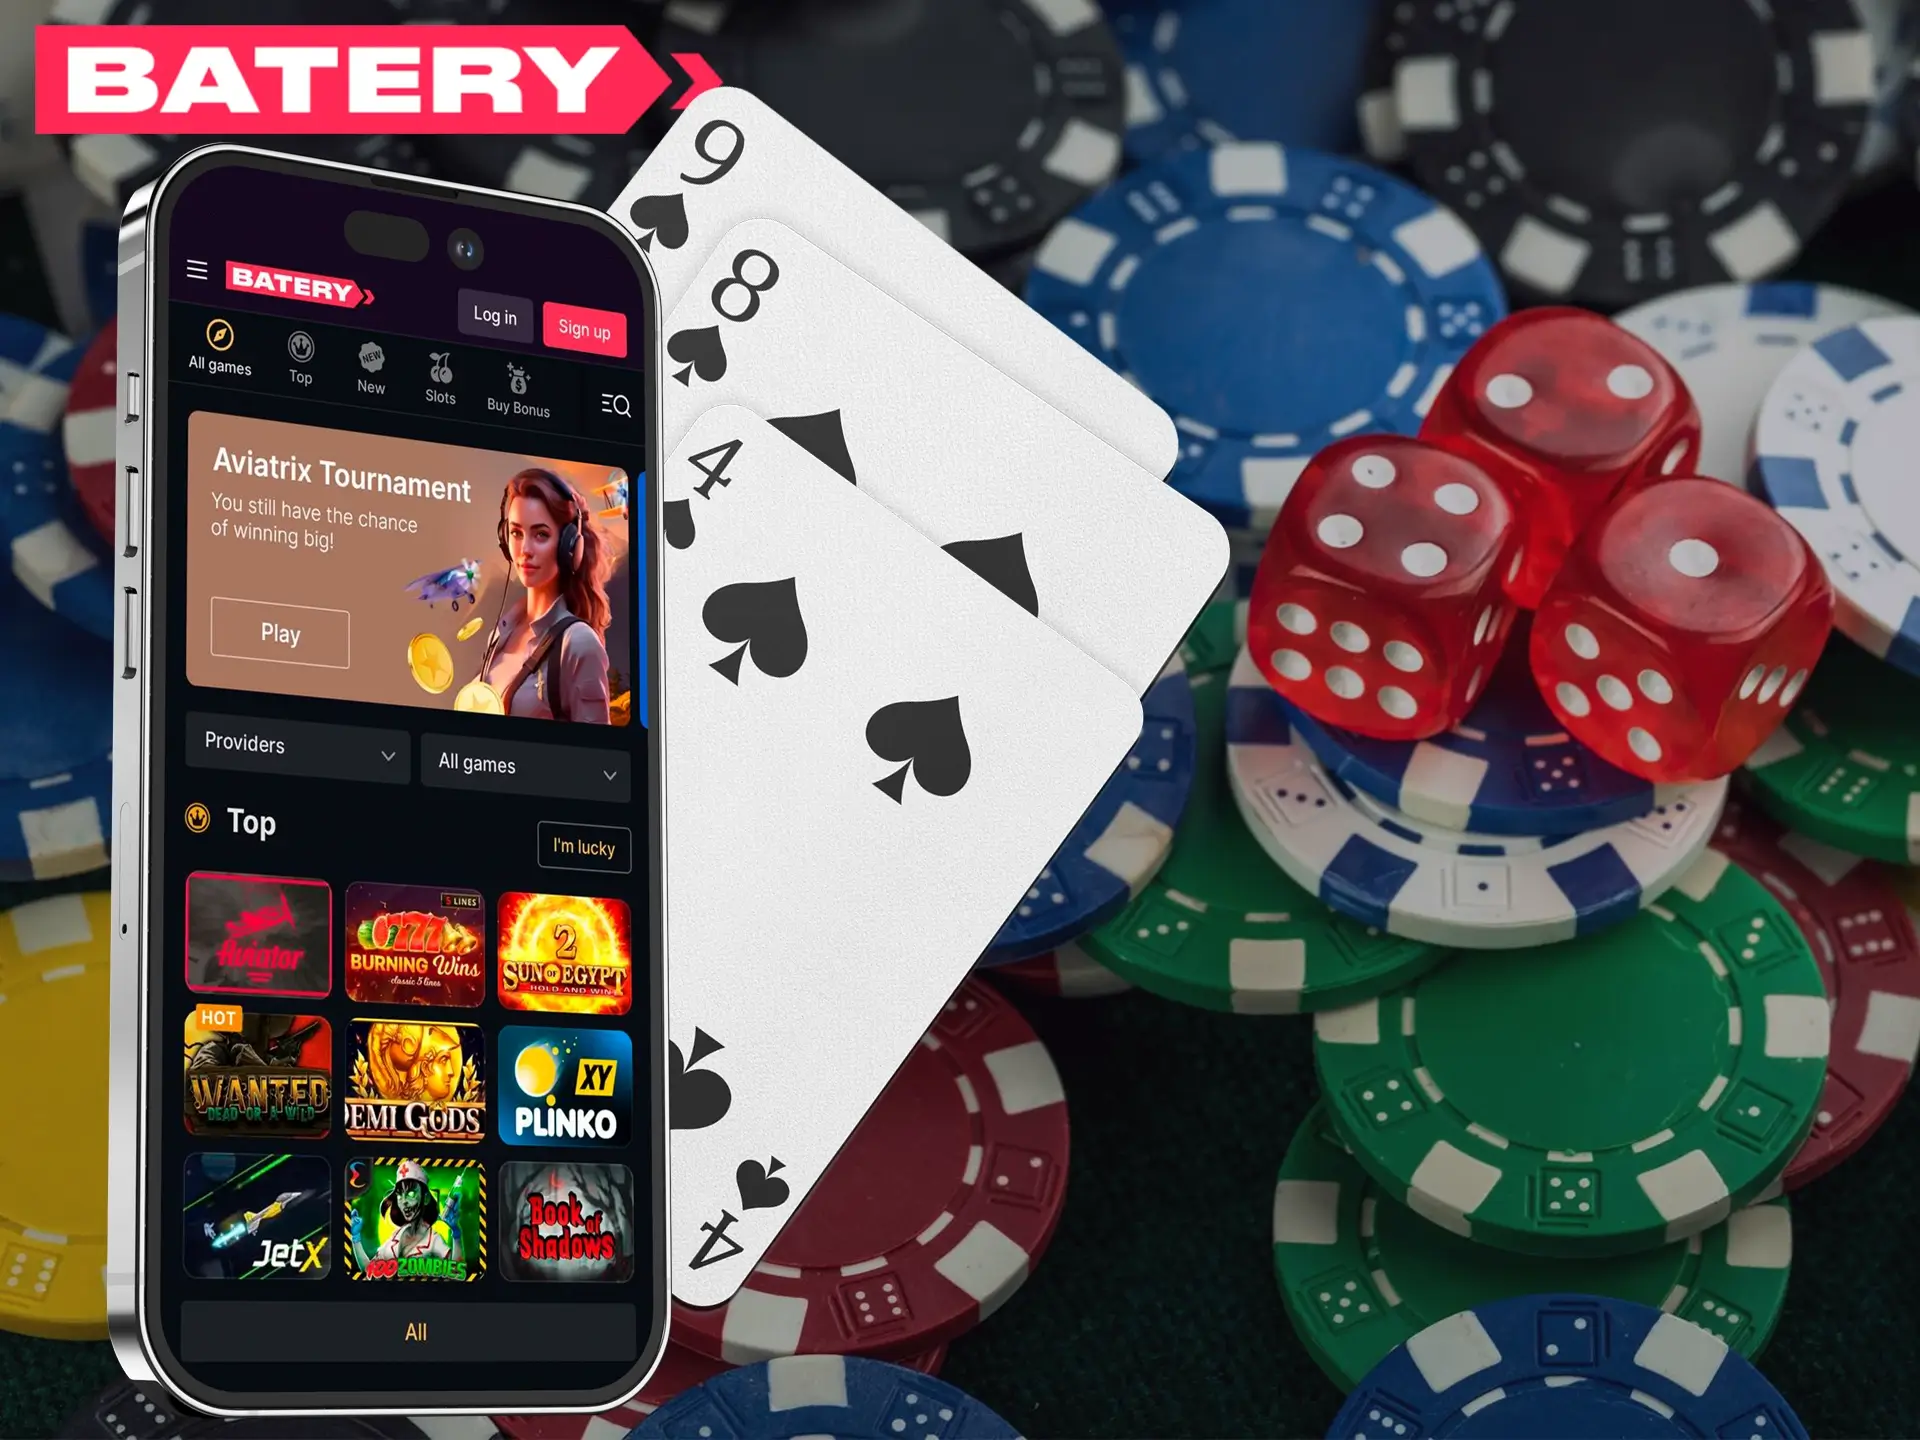 In the Batery app you will find a wide line of casino games to suit your taste.